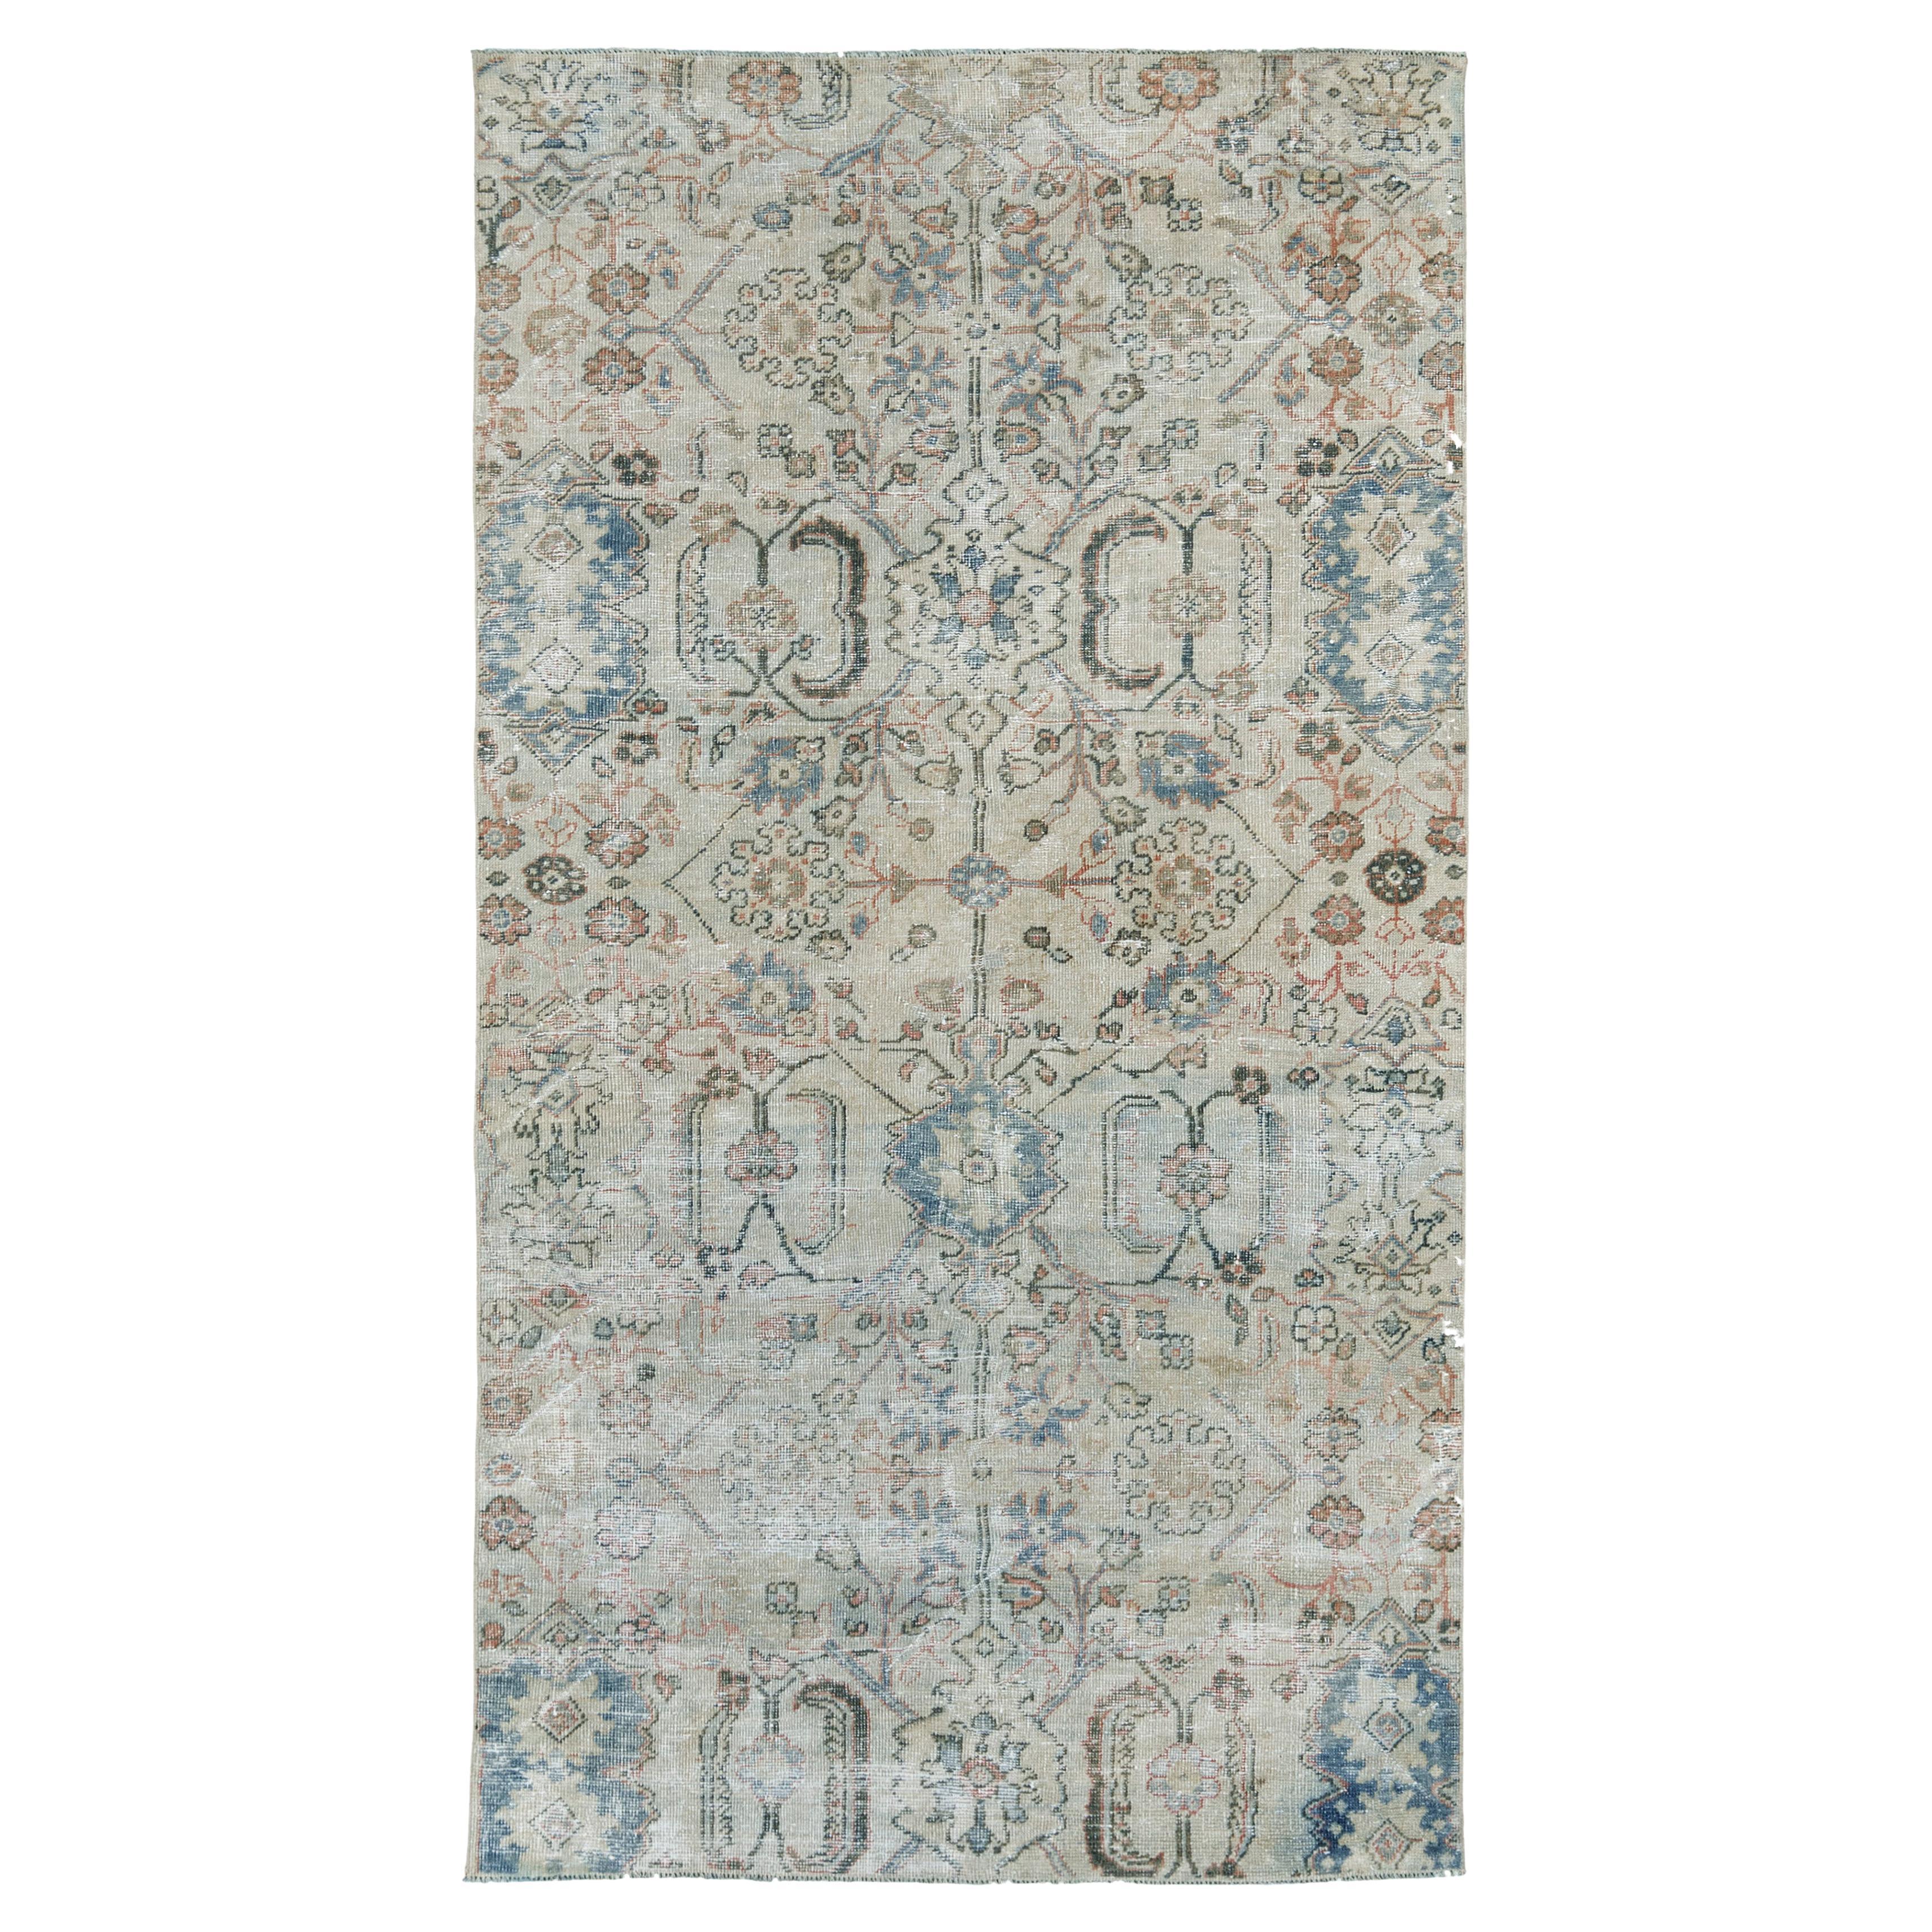 Antique Persian Mahal by Mehraban Rugs